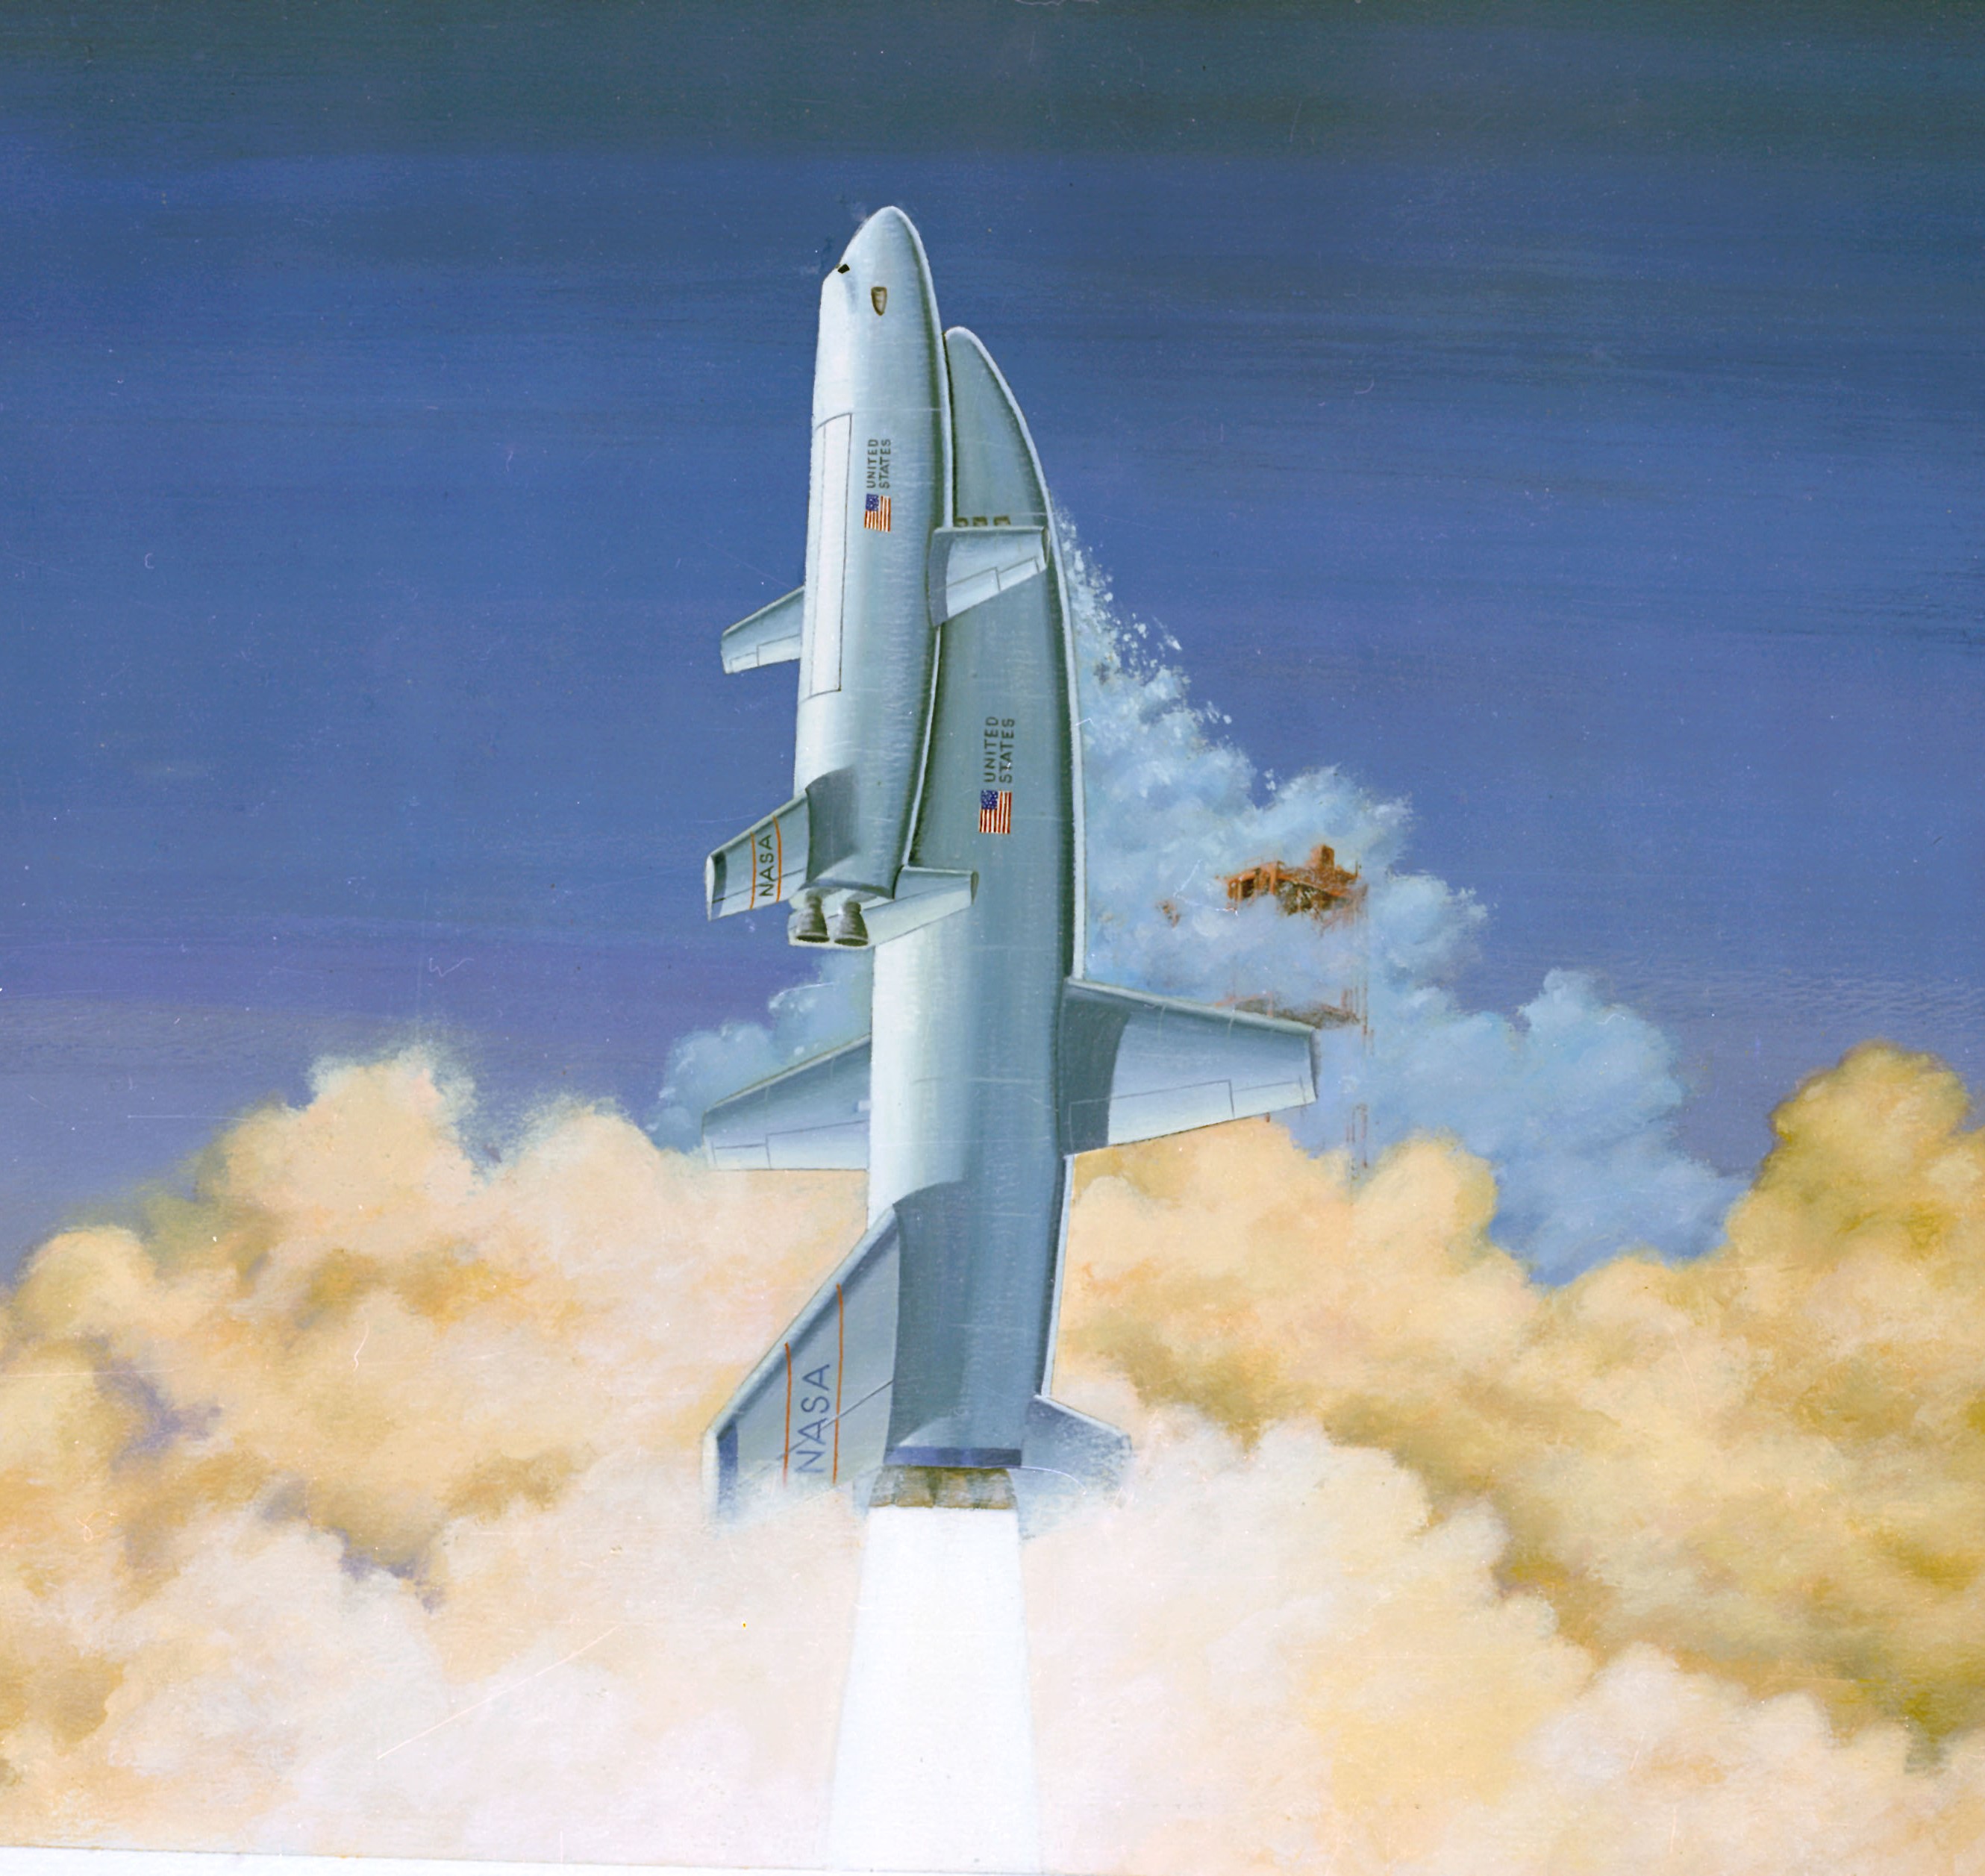 Concept of a fully reusable space shuttle system from early 1969